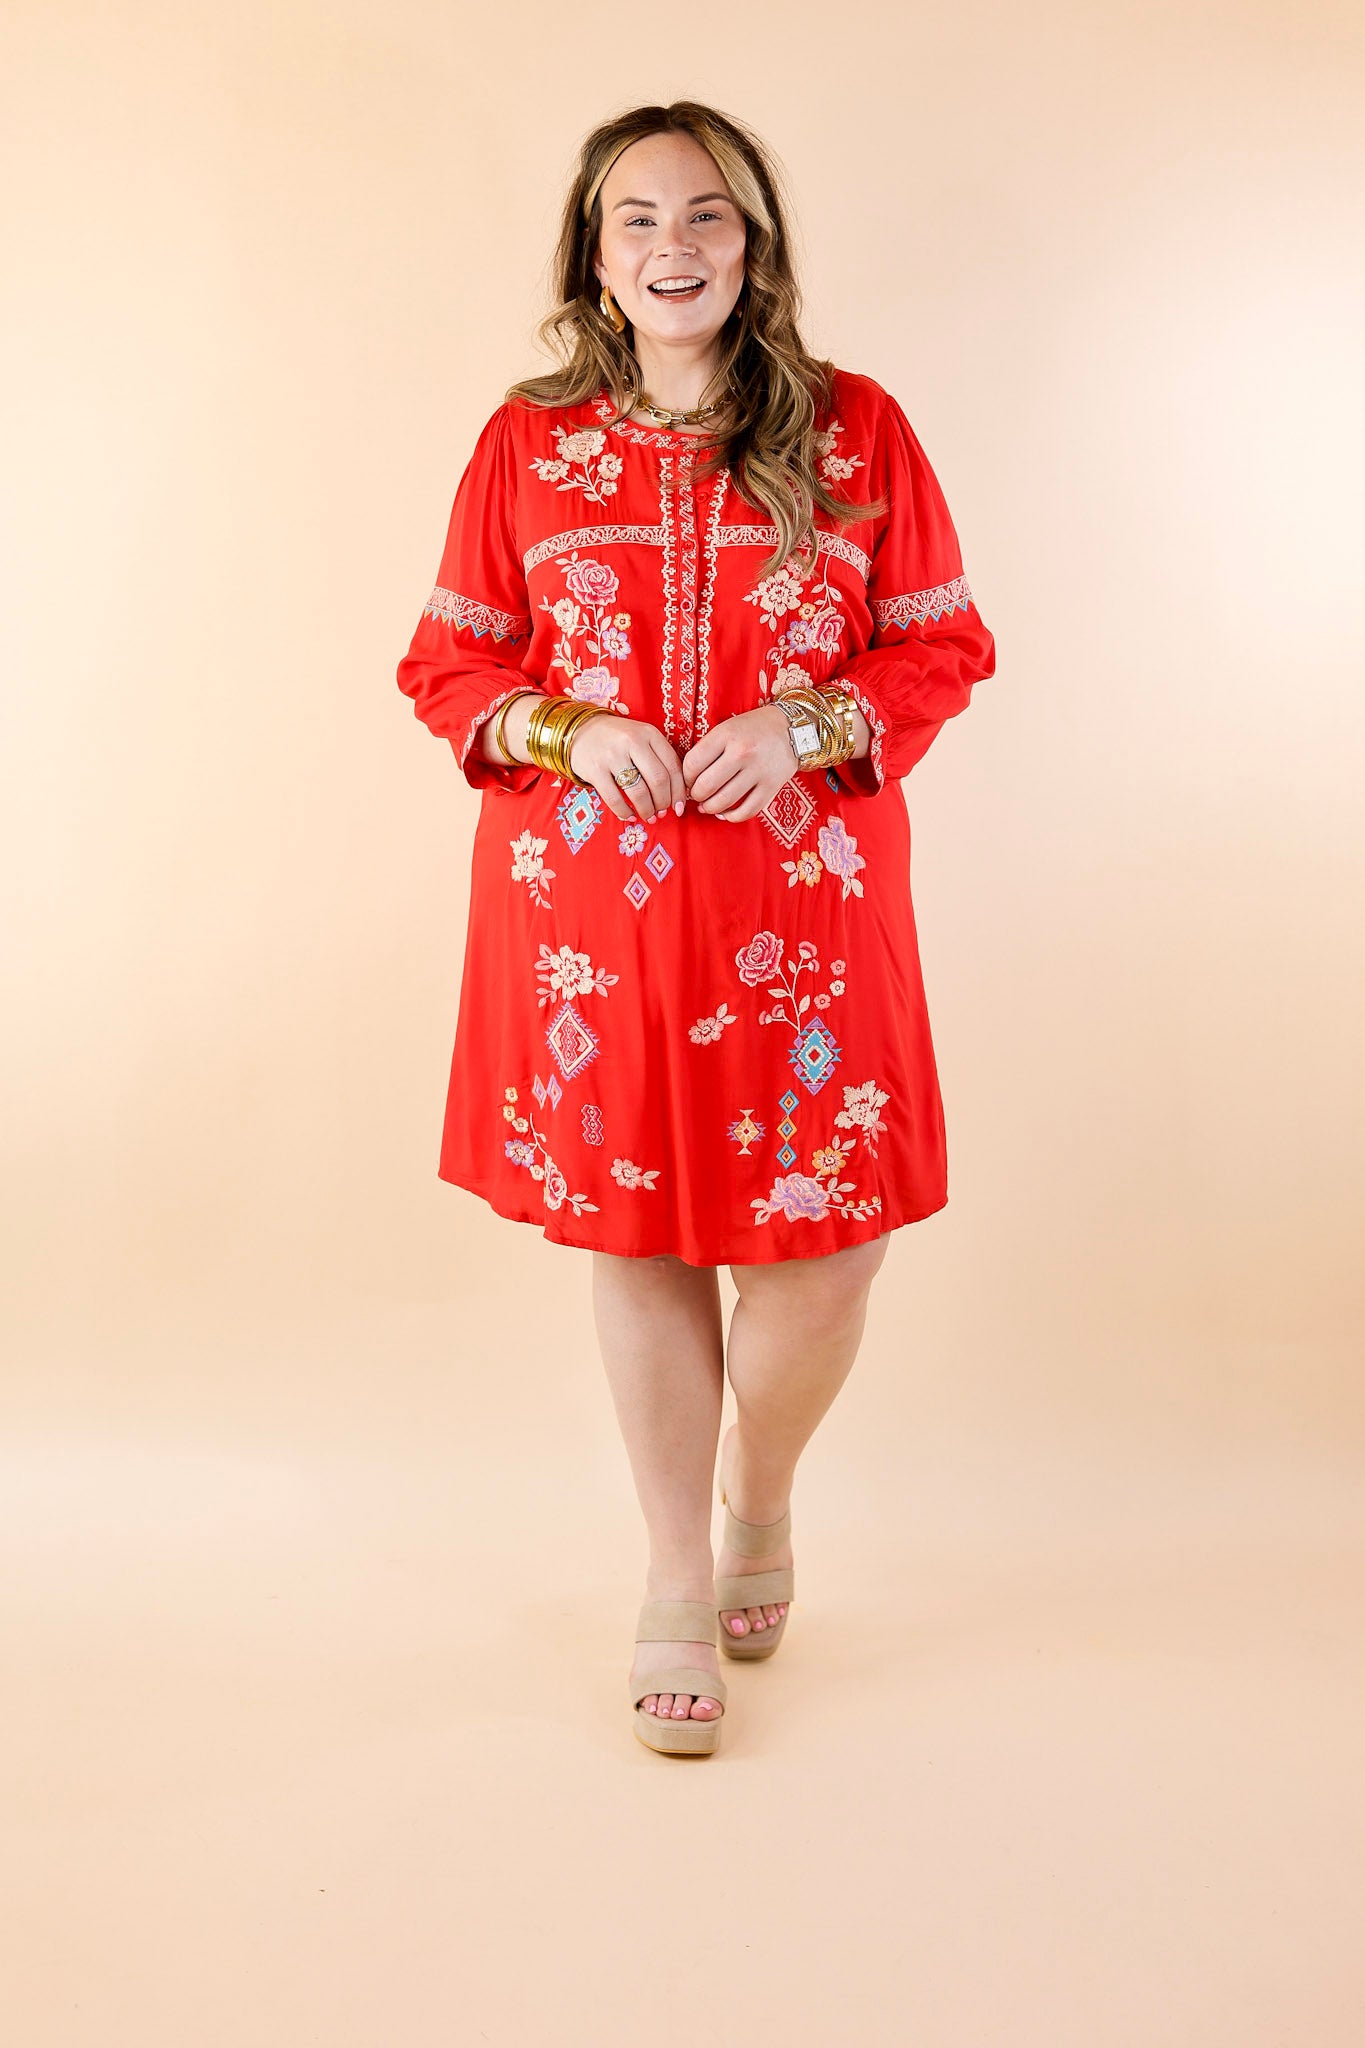 Chasing Sunshine Half Button Embroidered Dress with Half Sleeves in Red - Giddy Up Glamour Boutique